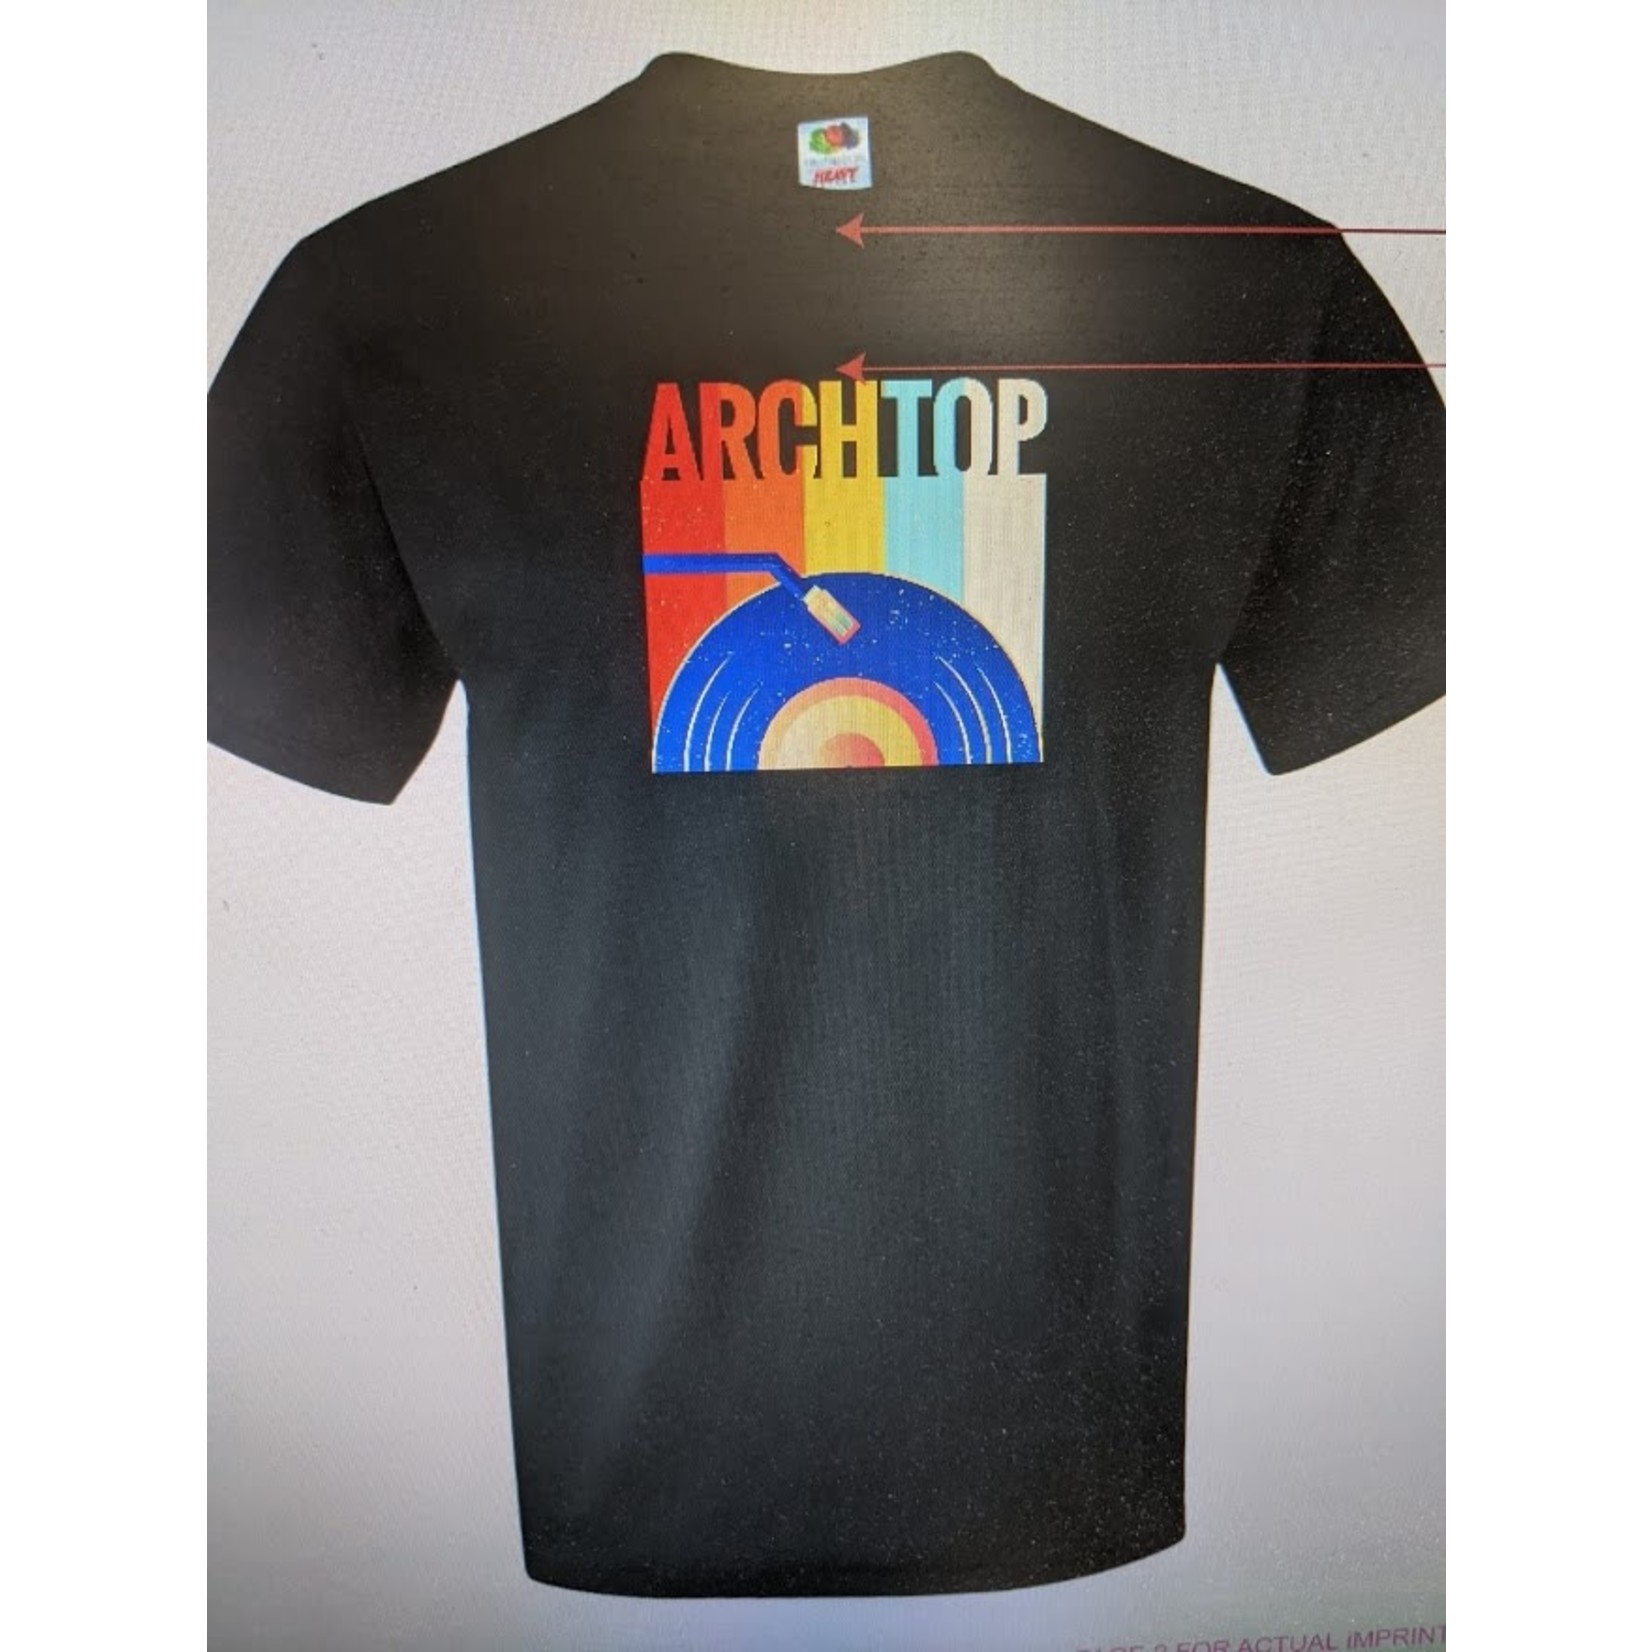 ARCHTOP T-SHIRT - TURNTABLE - UNISEX